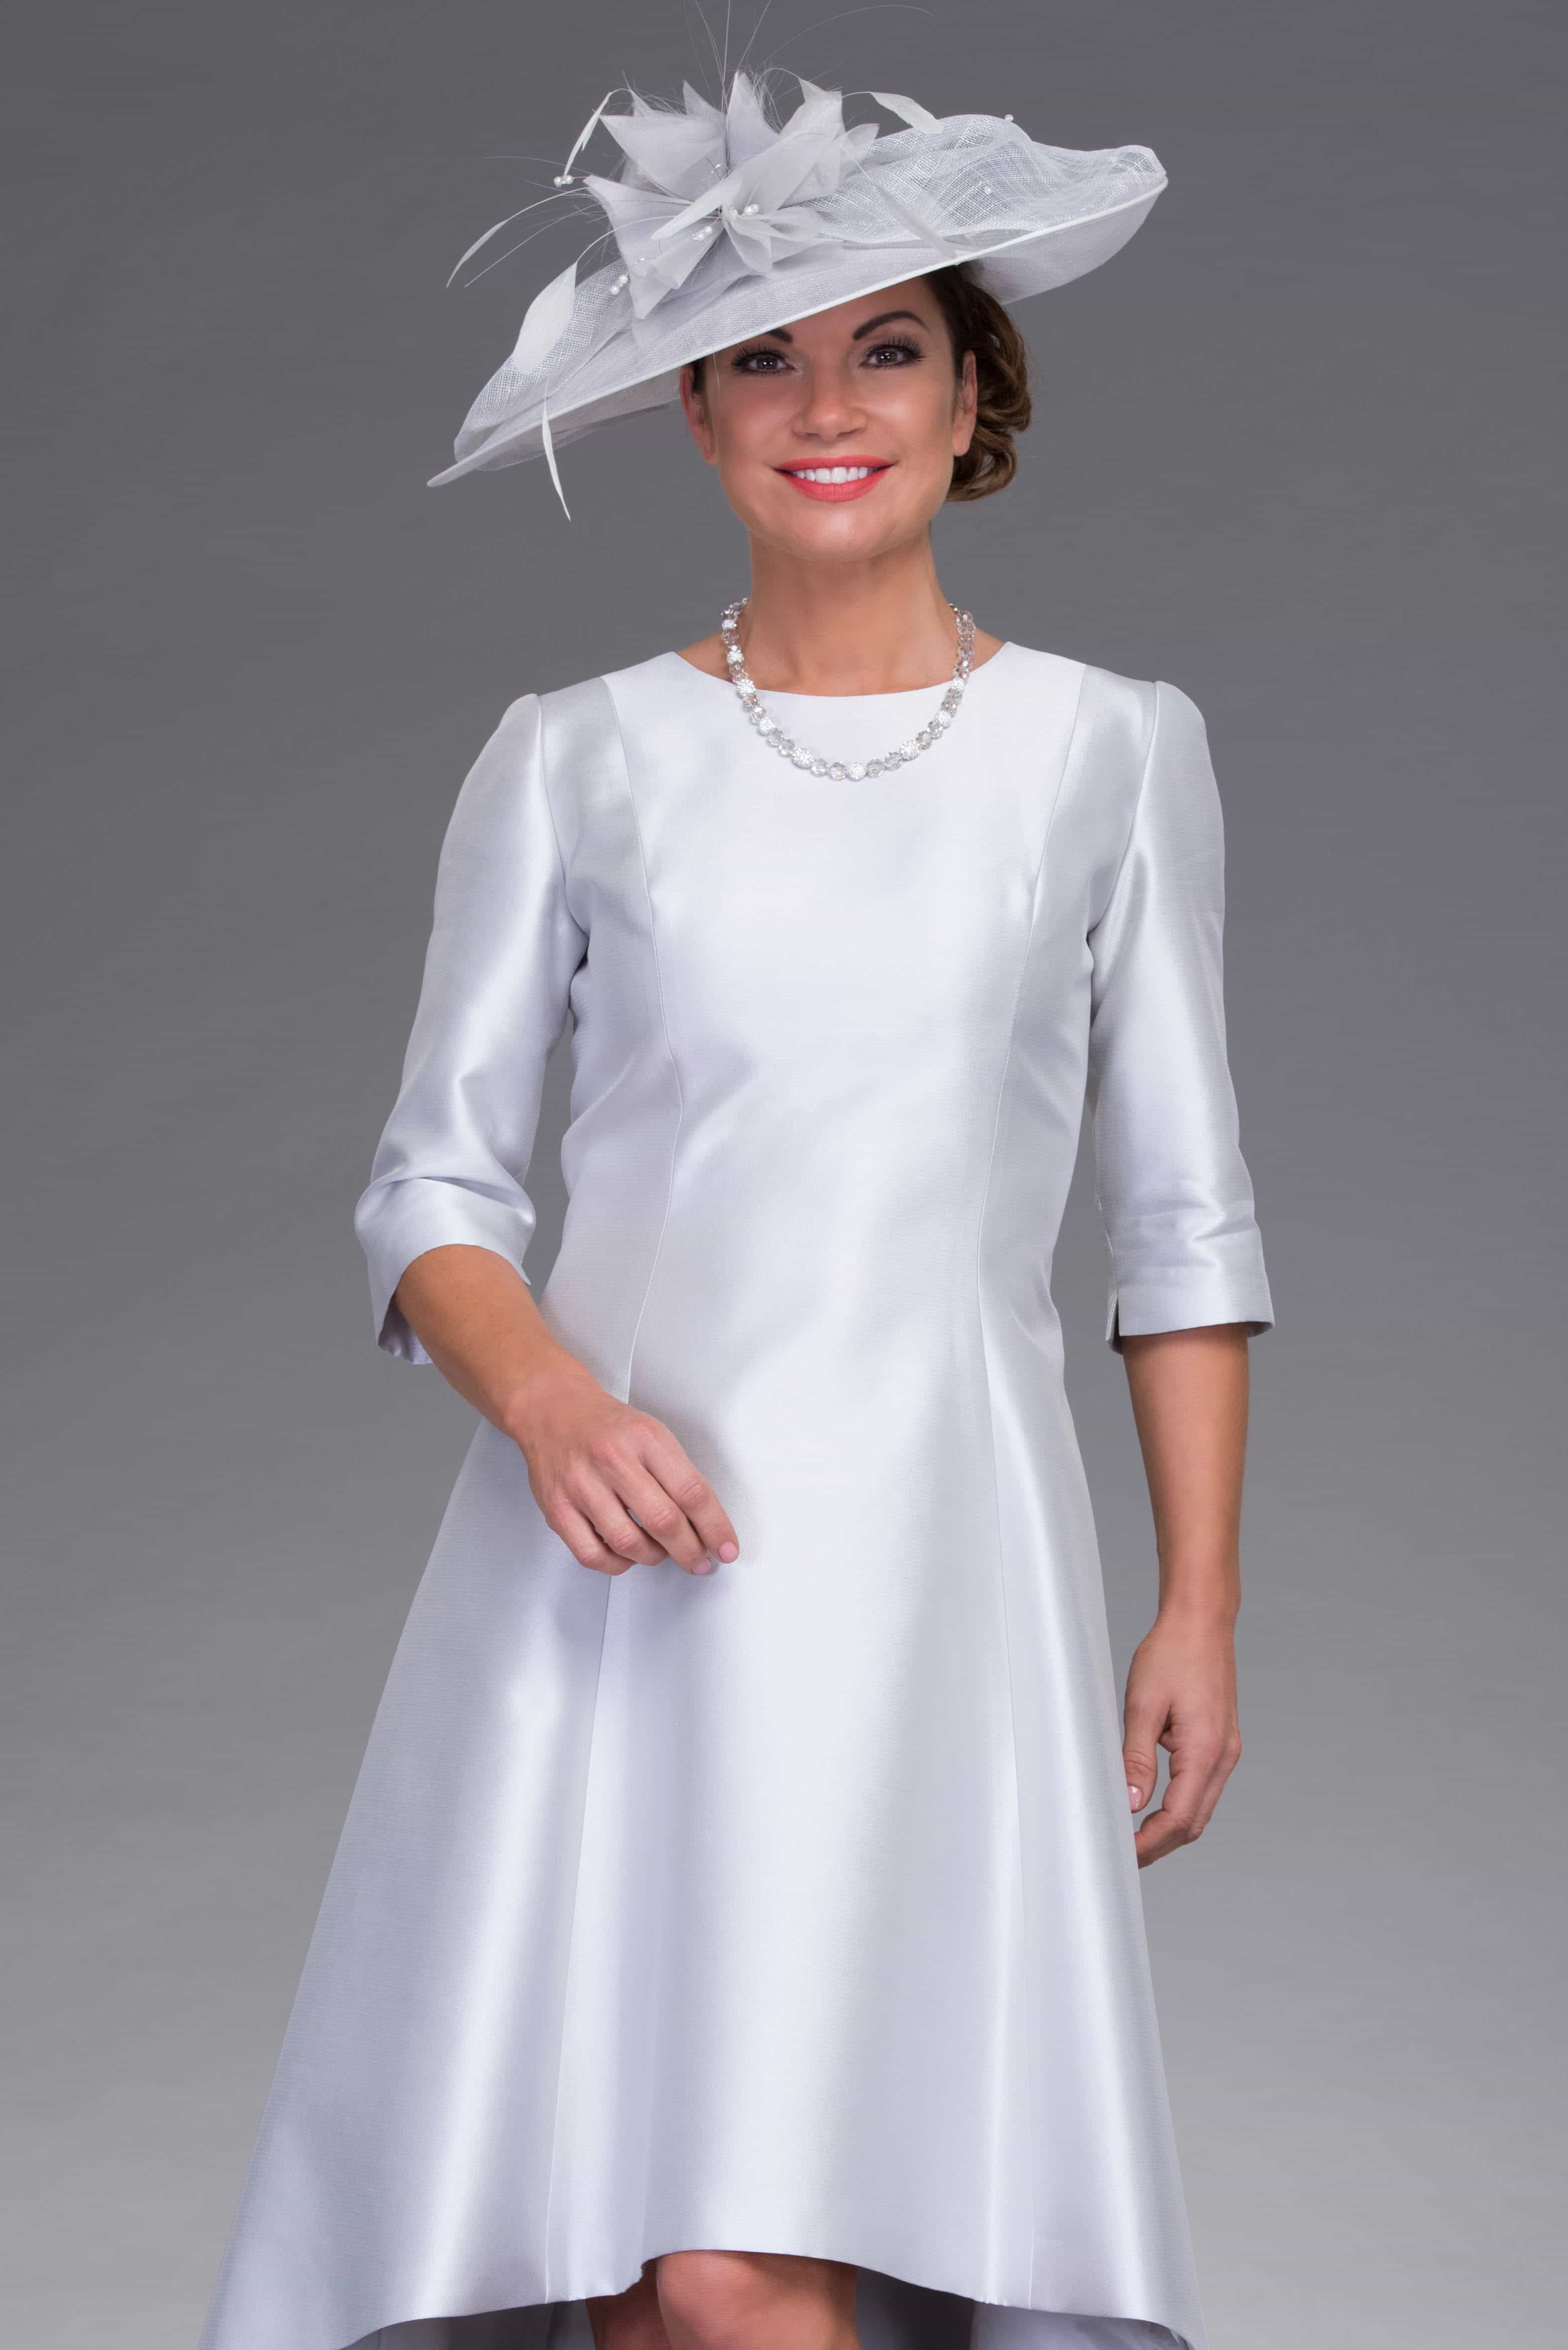 Dipped hem dress with sleeves. 82871-V - Catherines of Partick